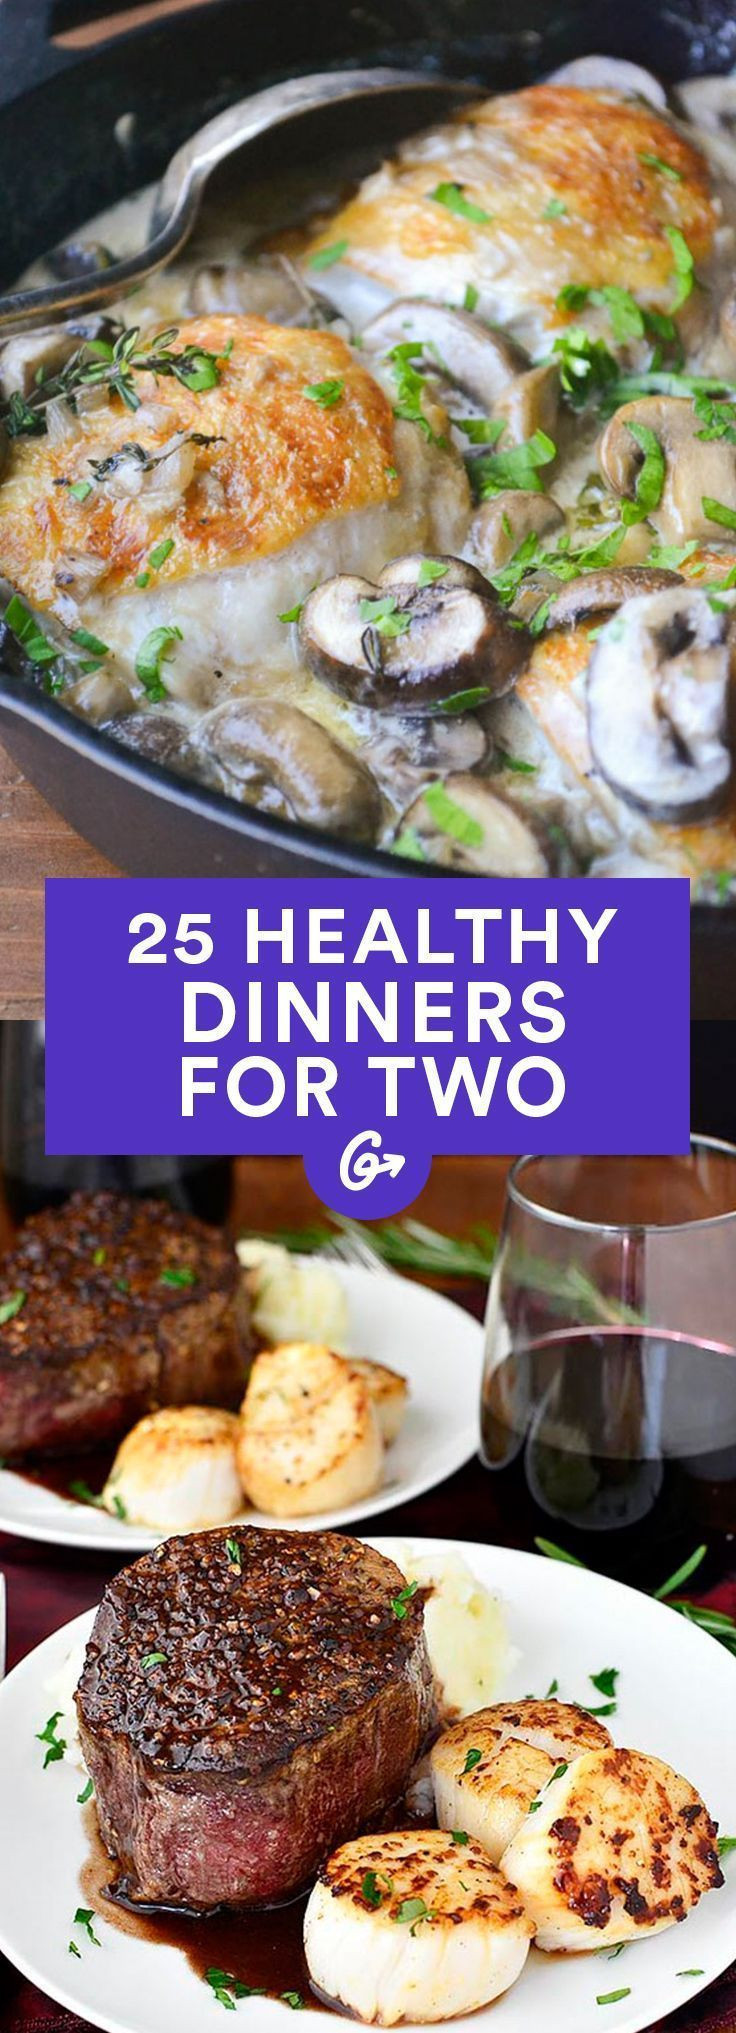 Top 15 Most Popular Healthy Dinners for Two On A Budget